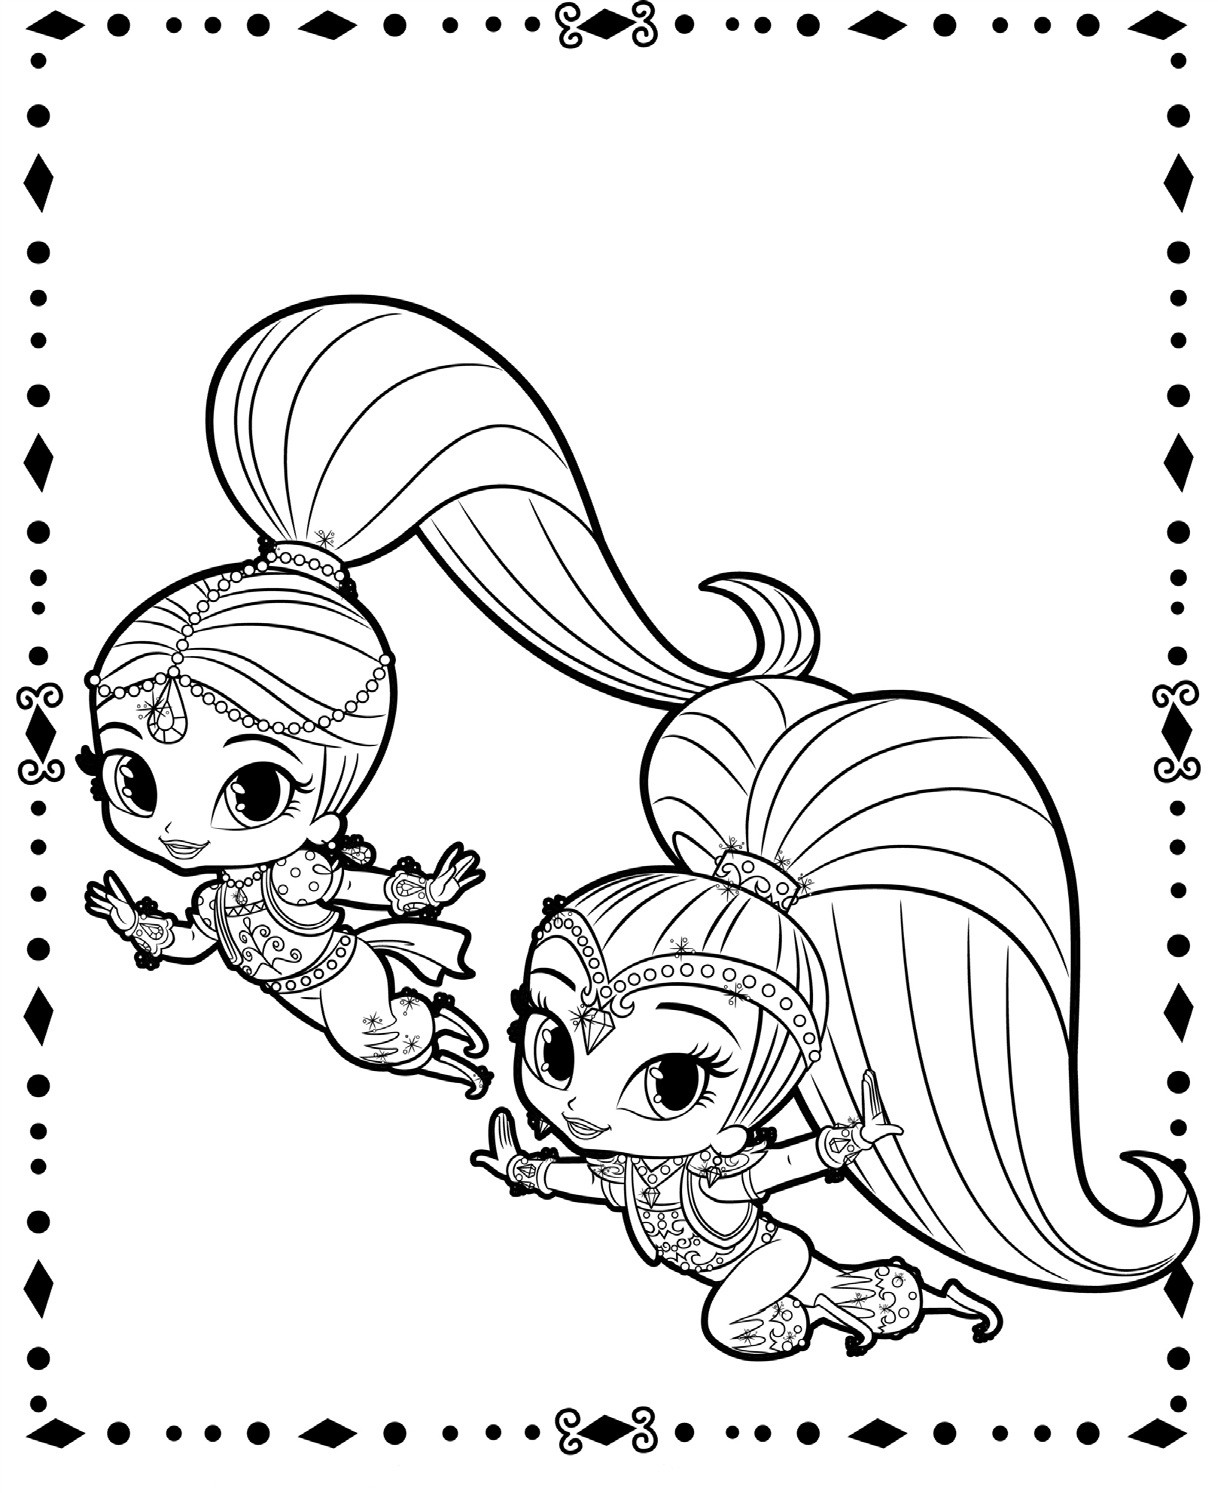 Shimmer And Shine Printable Coloring Pages
 Shimmer and Shine coloring pages to and print for